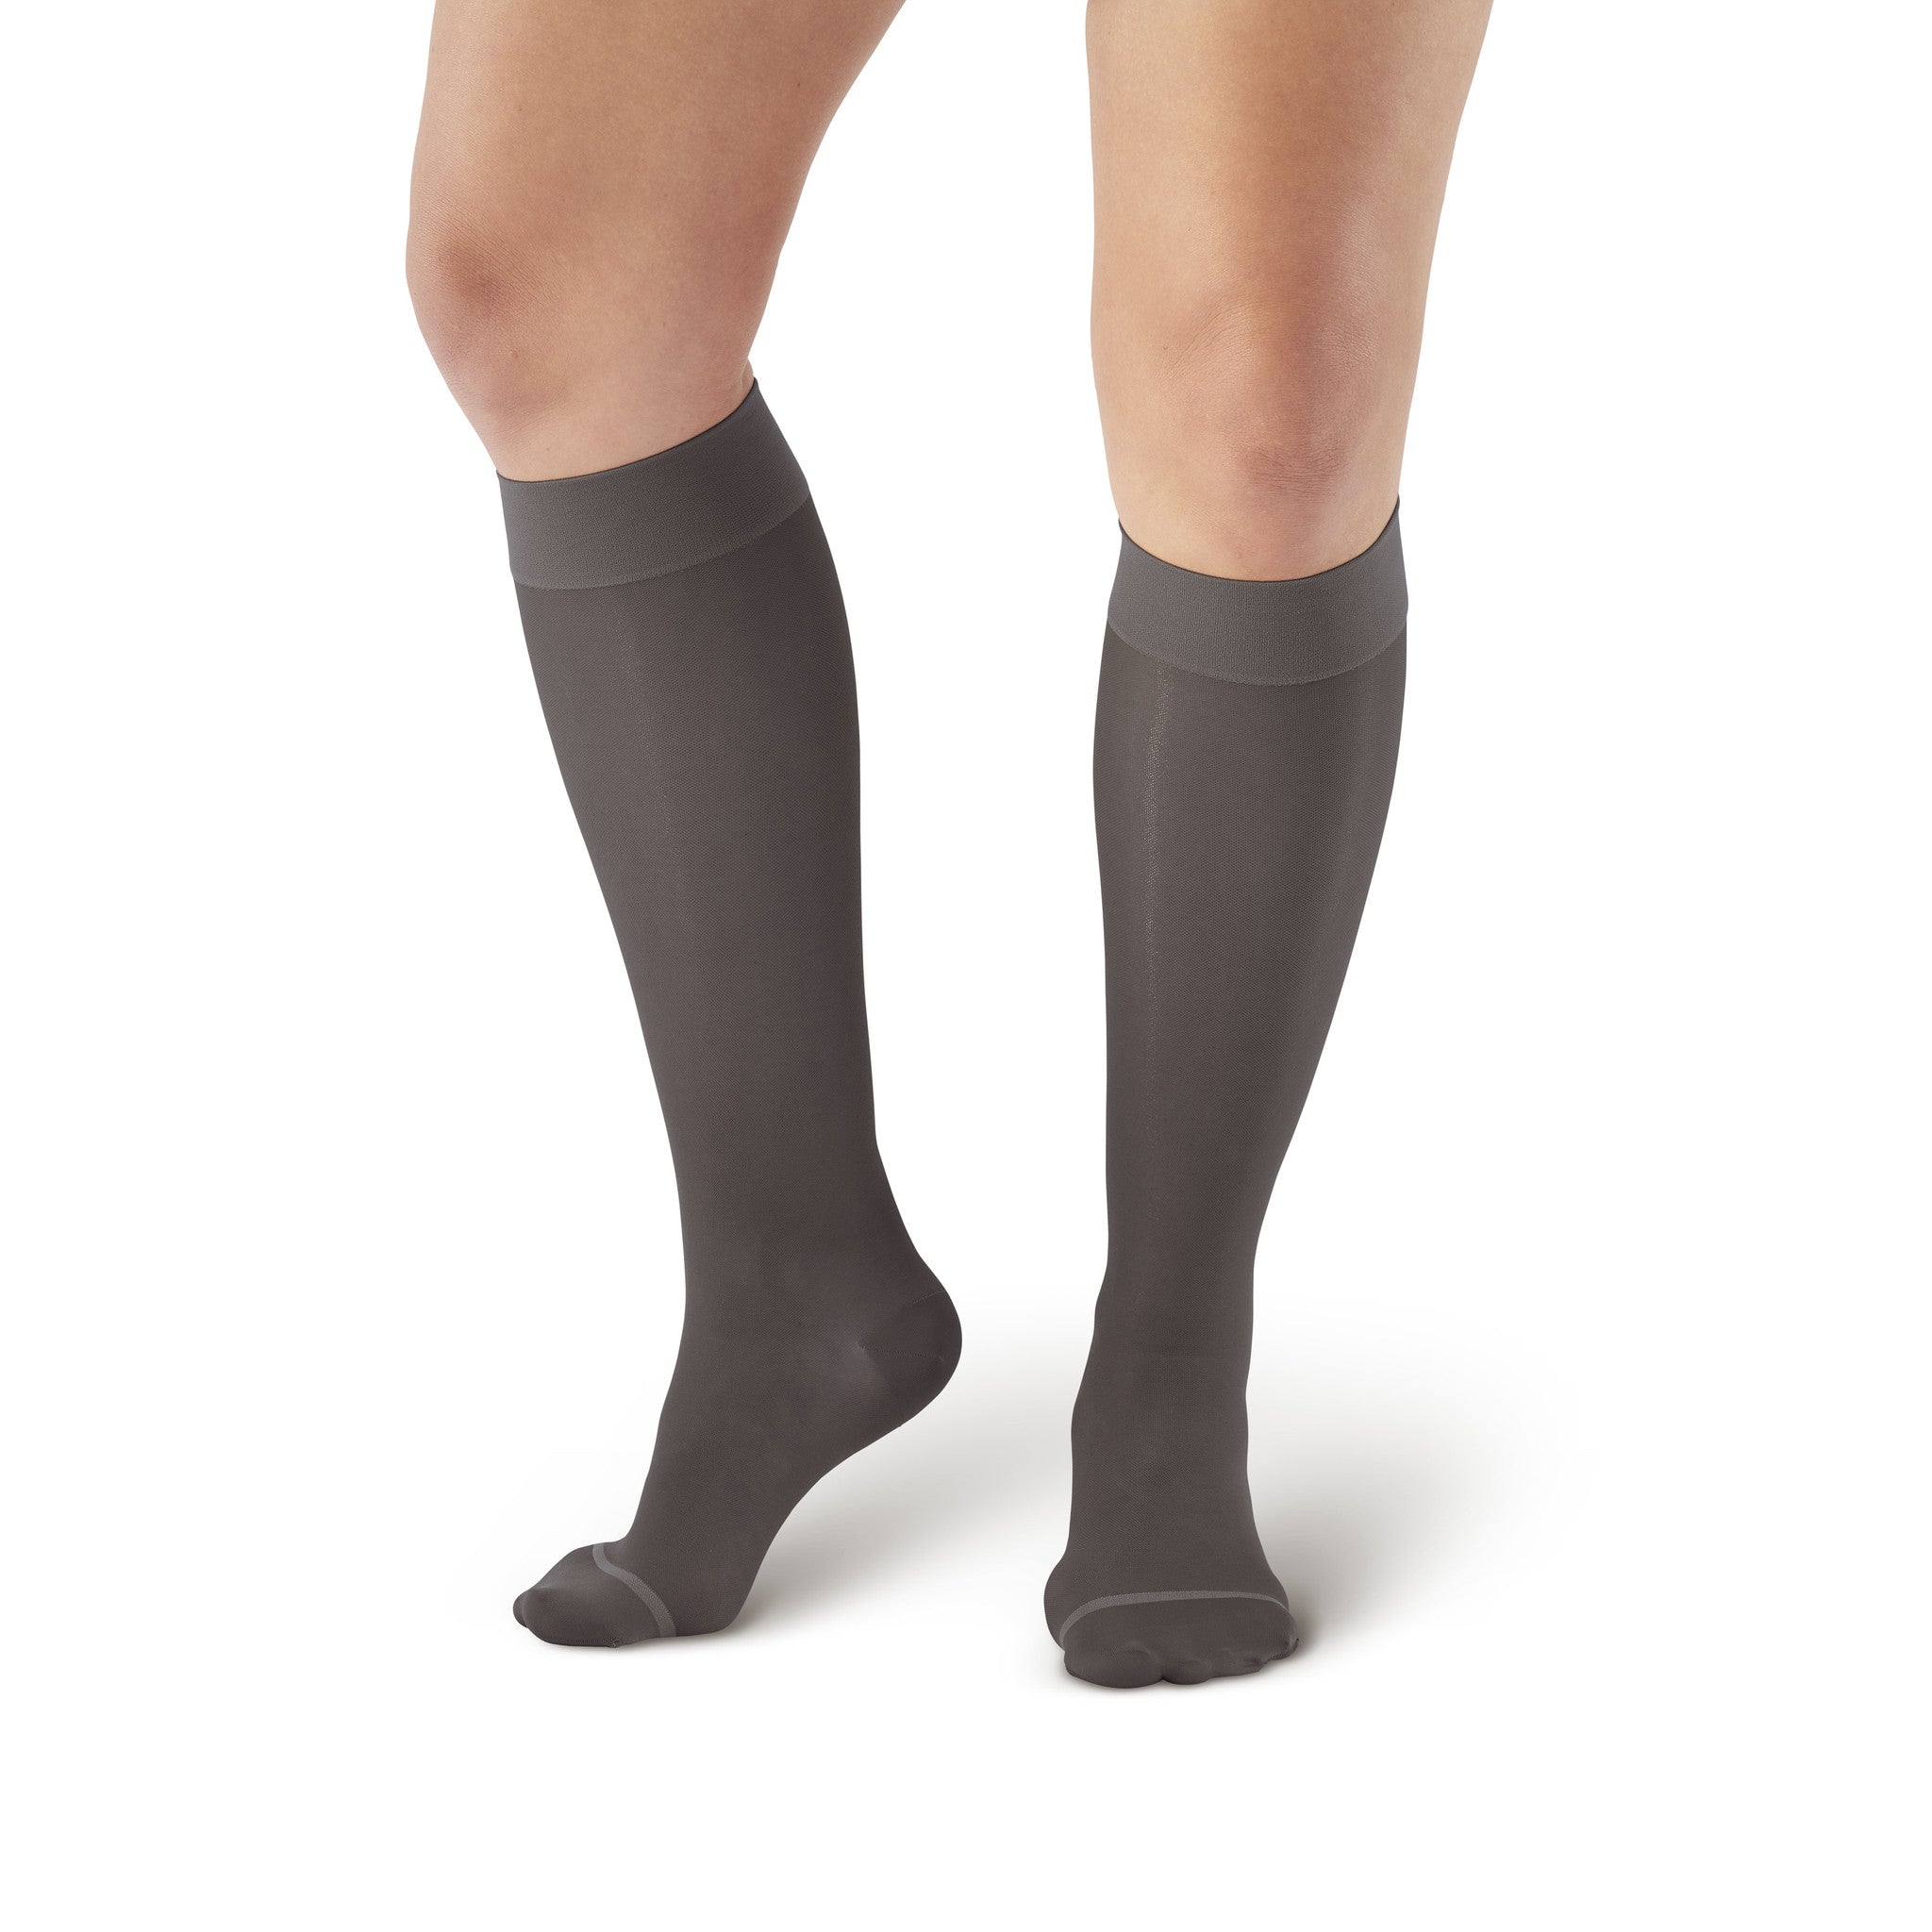 Ease Microfiber Knee Highs with Mild (15-20mmHg) Compression